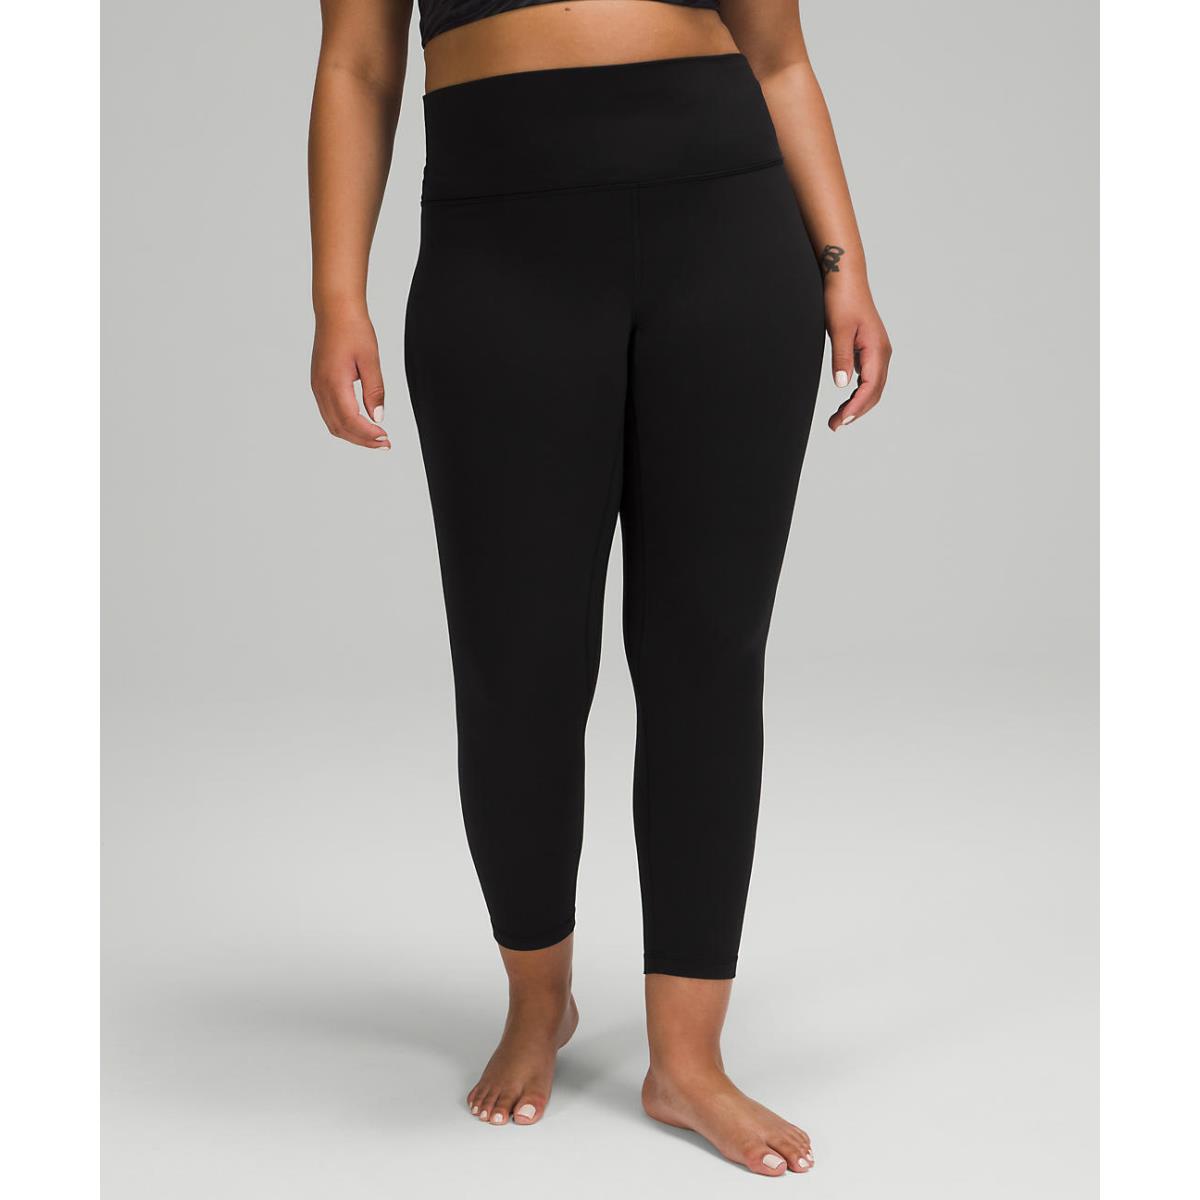 Lululemon Align Nulu High Rise Pant with 25 Inch Inseam Black